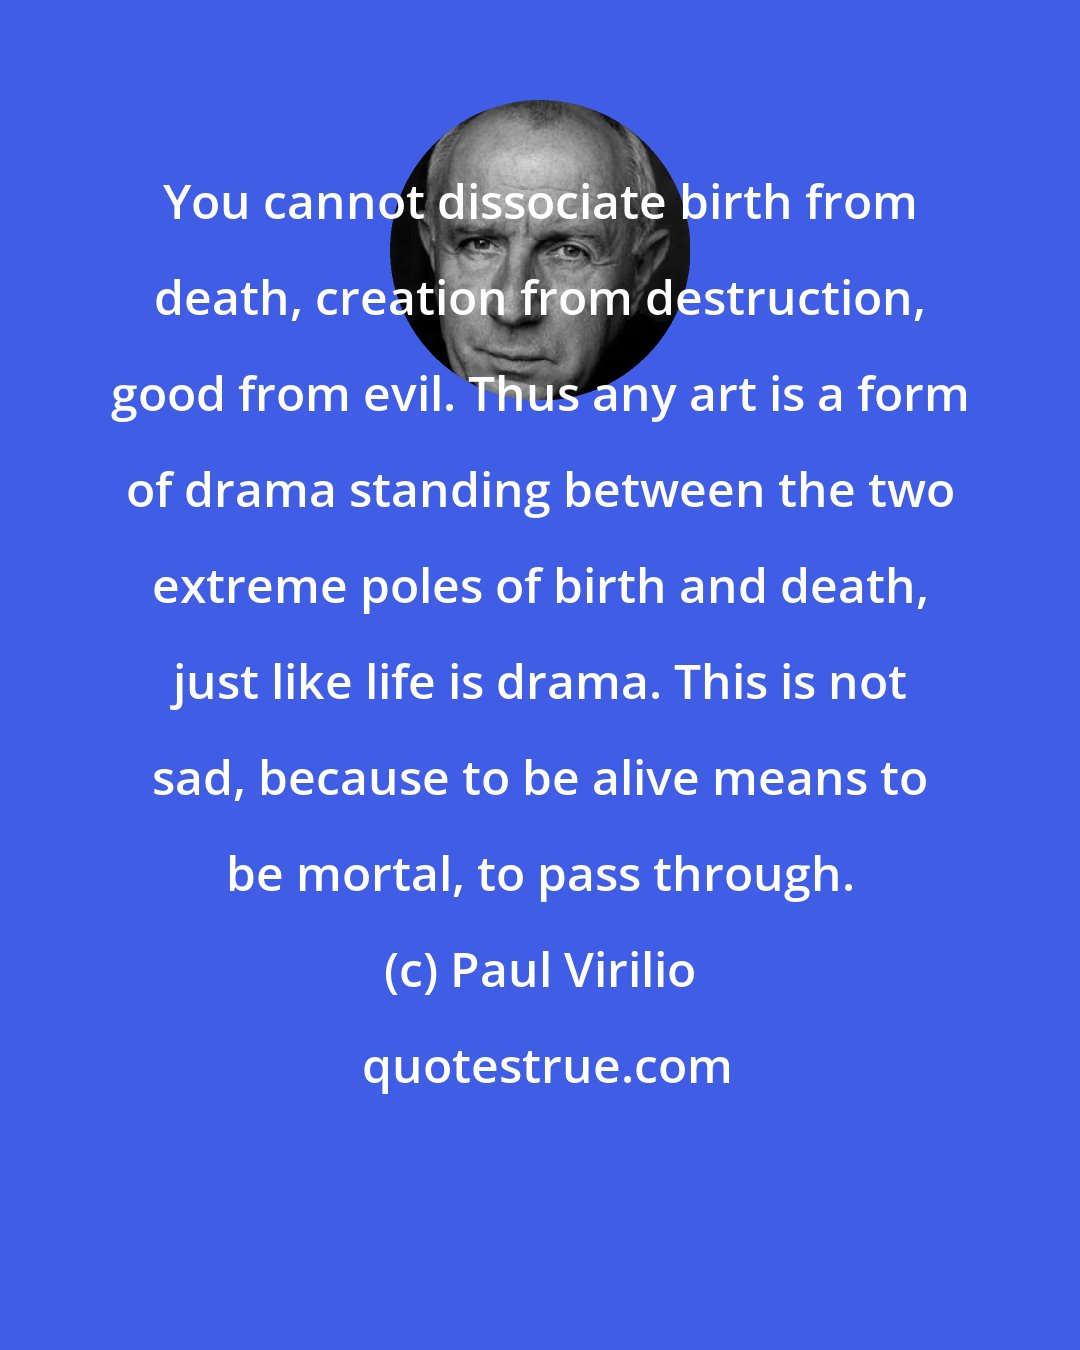 Paul Virilio: You cannot dissociate birth from death, creation from destruction, good from evil. Thus any art is a form of drama standing between the two extreme poles of birth and death, just like life is drama. This is not sad, because to be alive means to be mortal, to pass through.